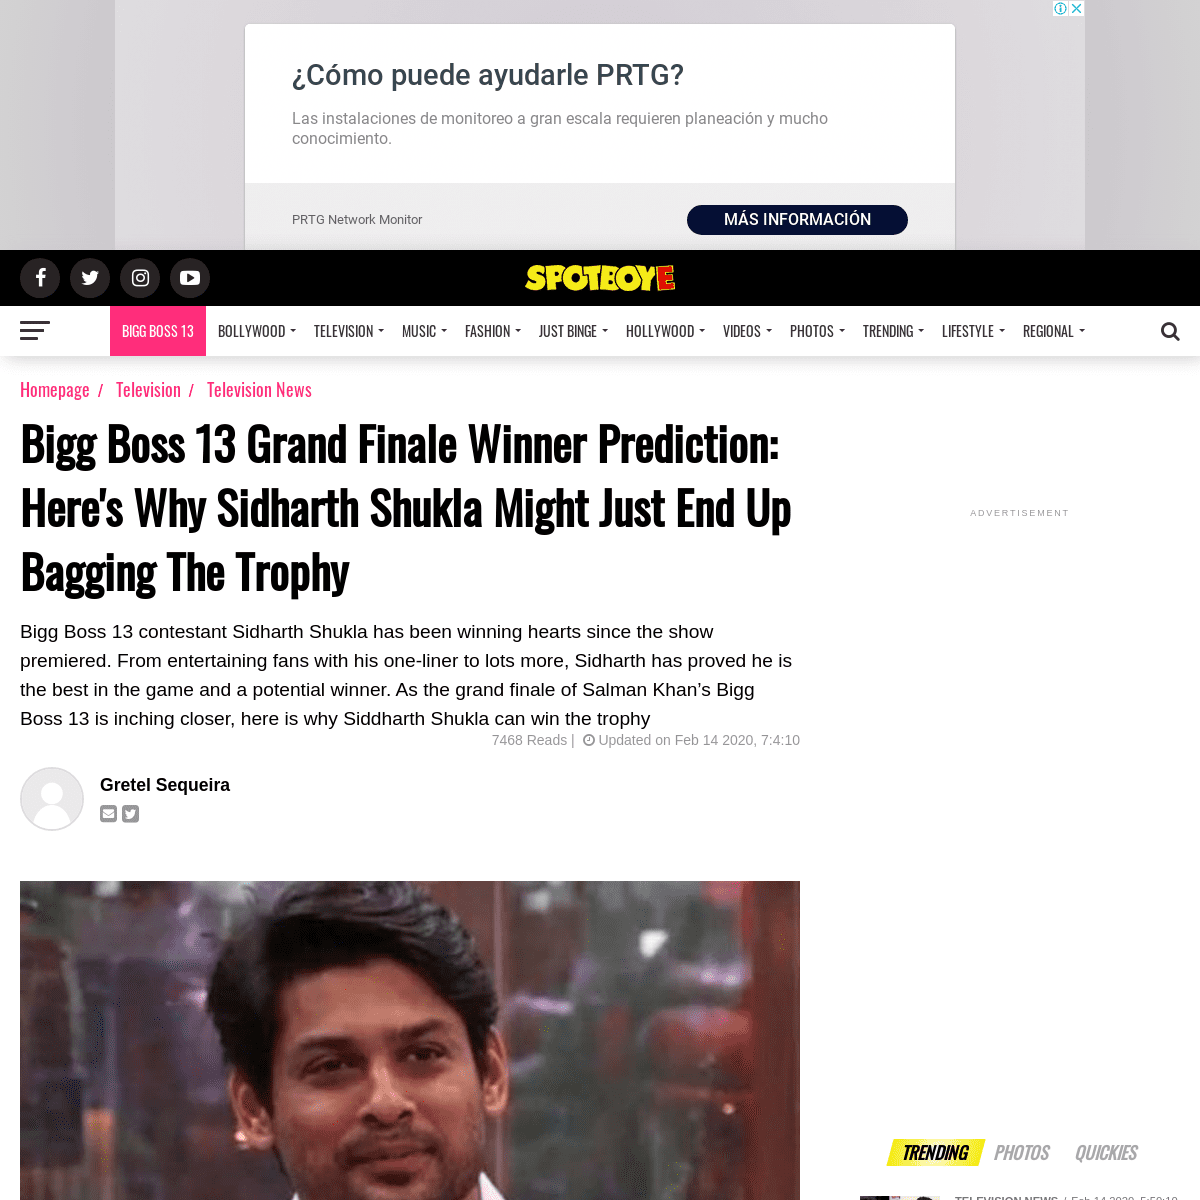 A complete backup of www.spotboye.com/television/television-news/bigg-boss-13-grand-finale-winner-prediction-can-siddharth-shukl